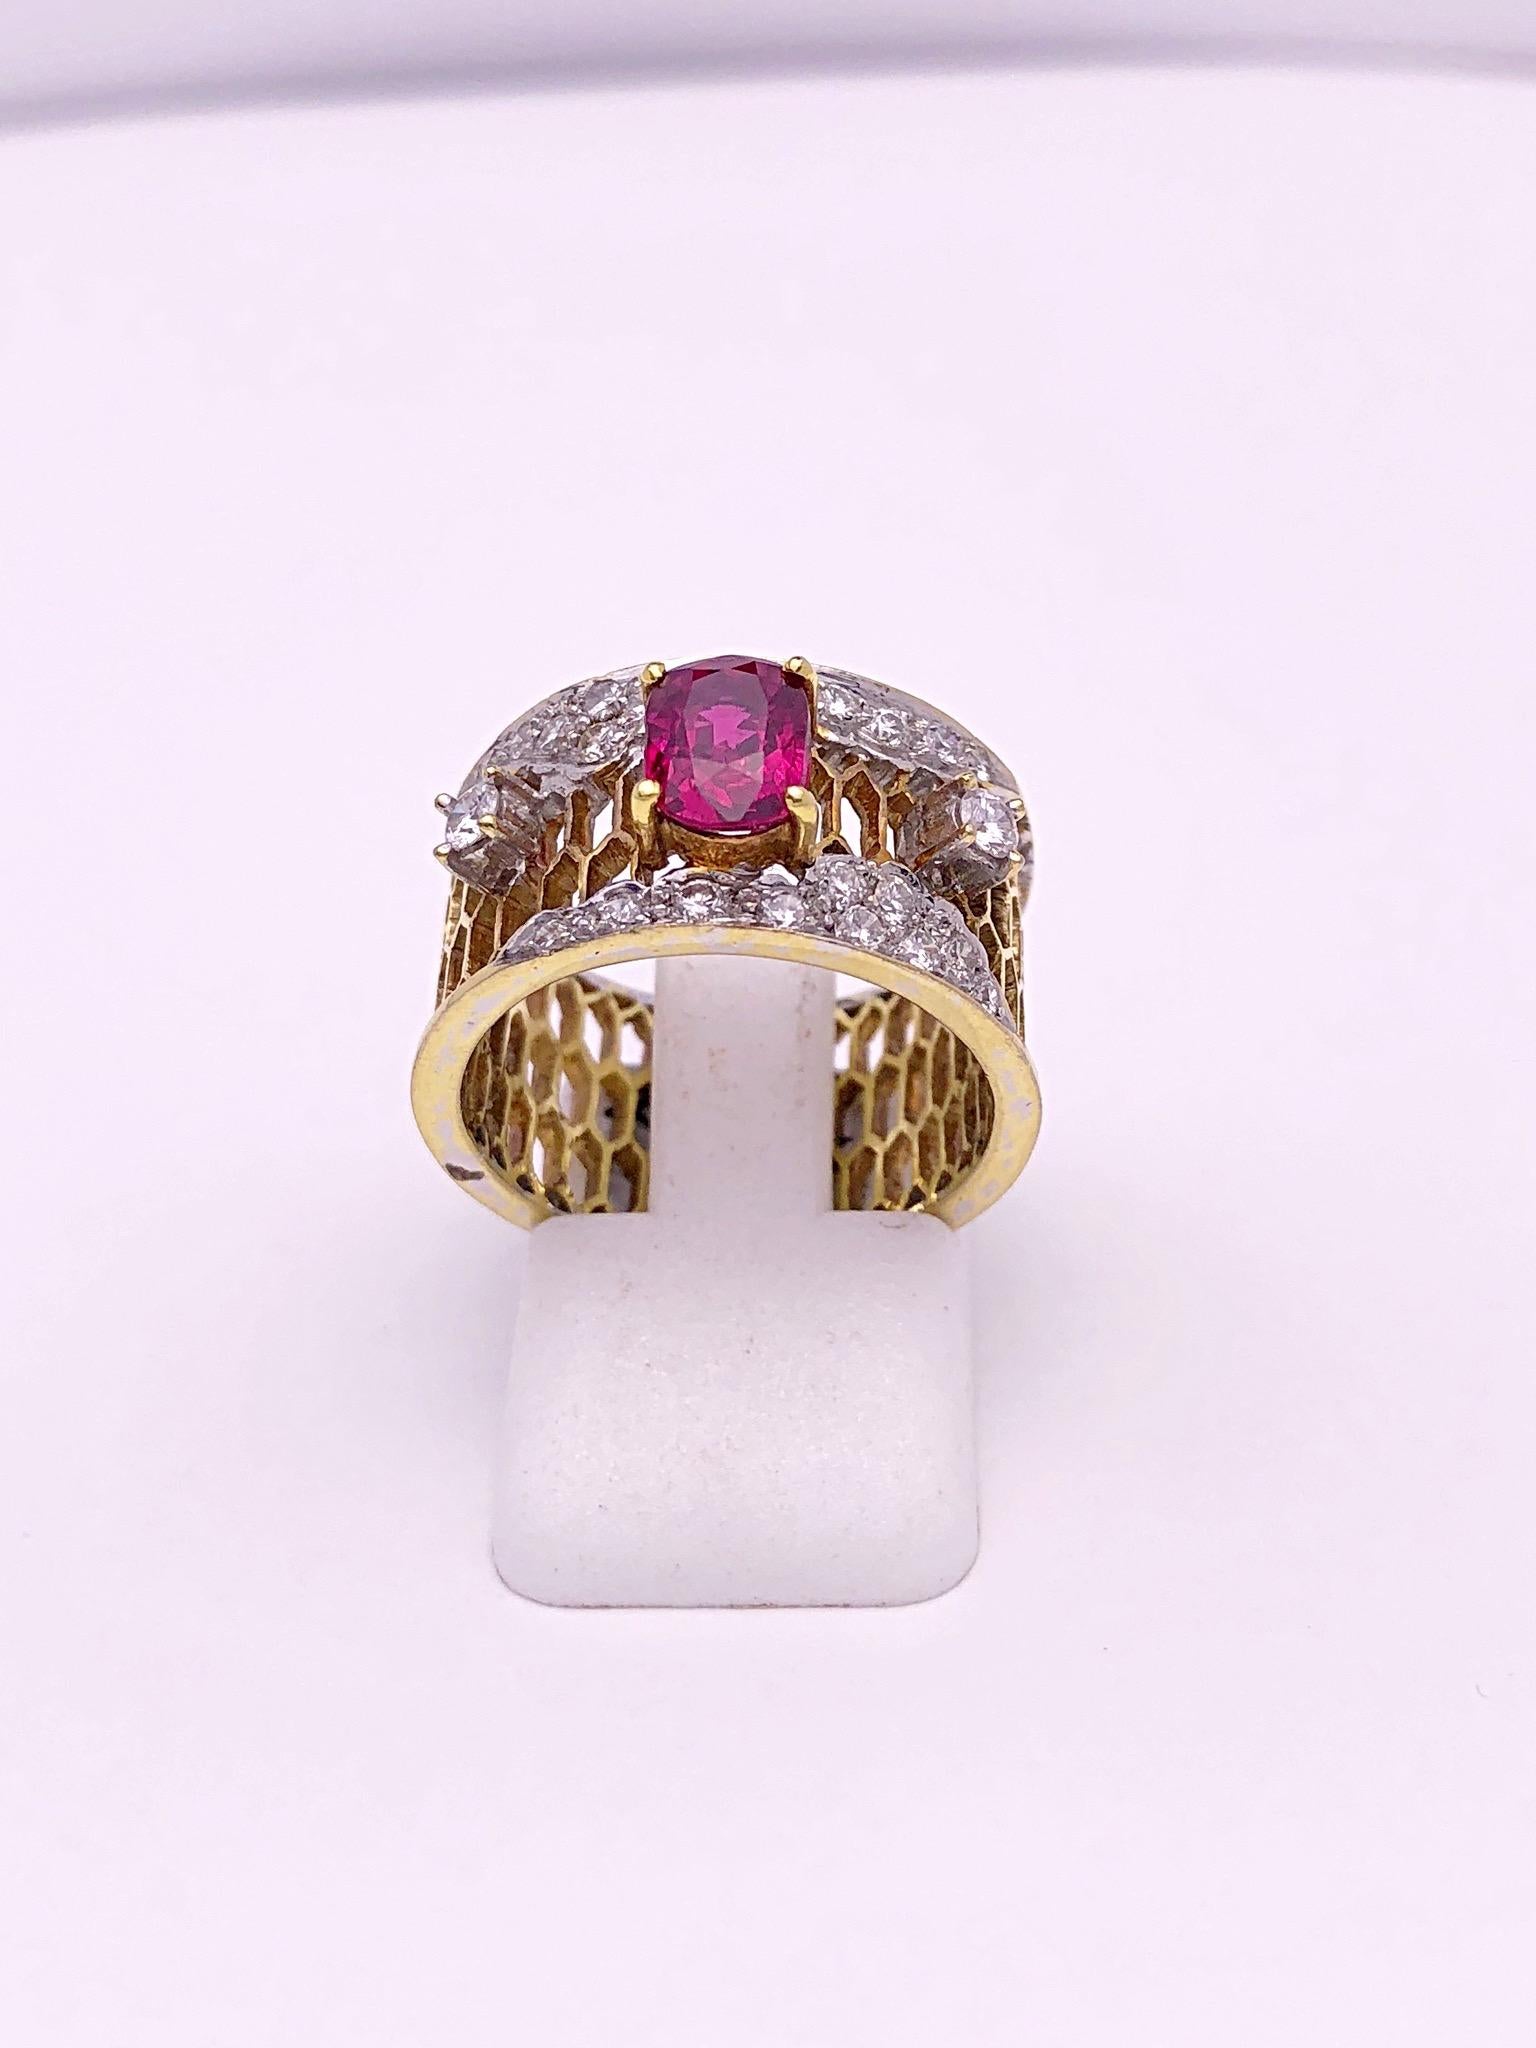 This is a beautiful vintage 18 karat yellow gold band ring. The center oval Ruby weighs 1.33 carats. There is a single round brilliant Diamond on either side of the ruby, along with some smaller diamonds accenting the band. The entire ring is in a